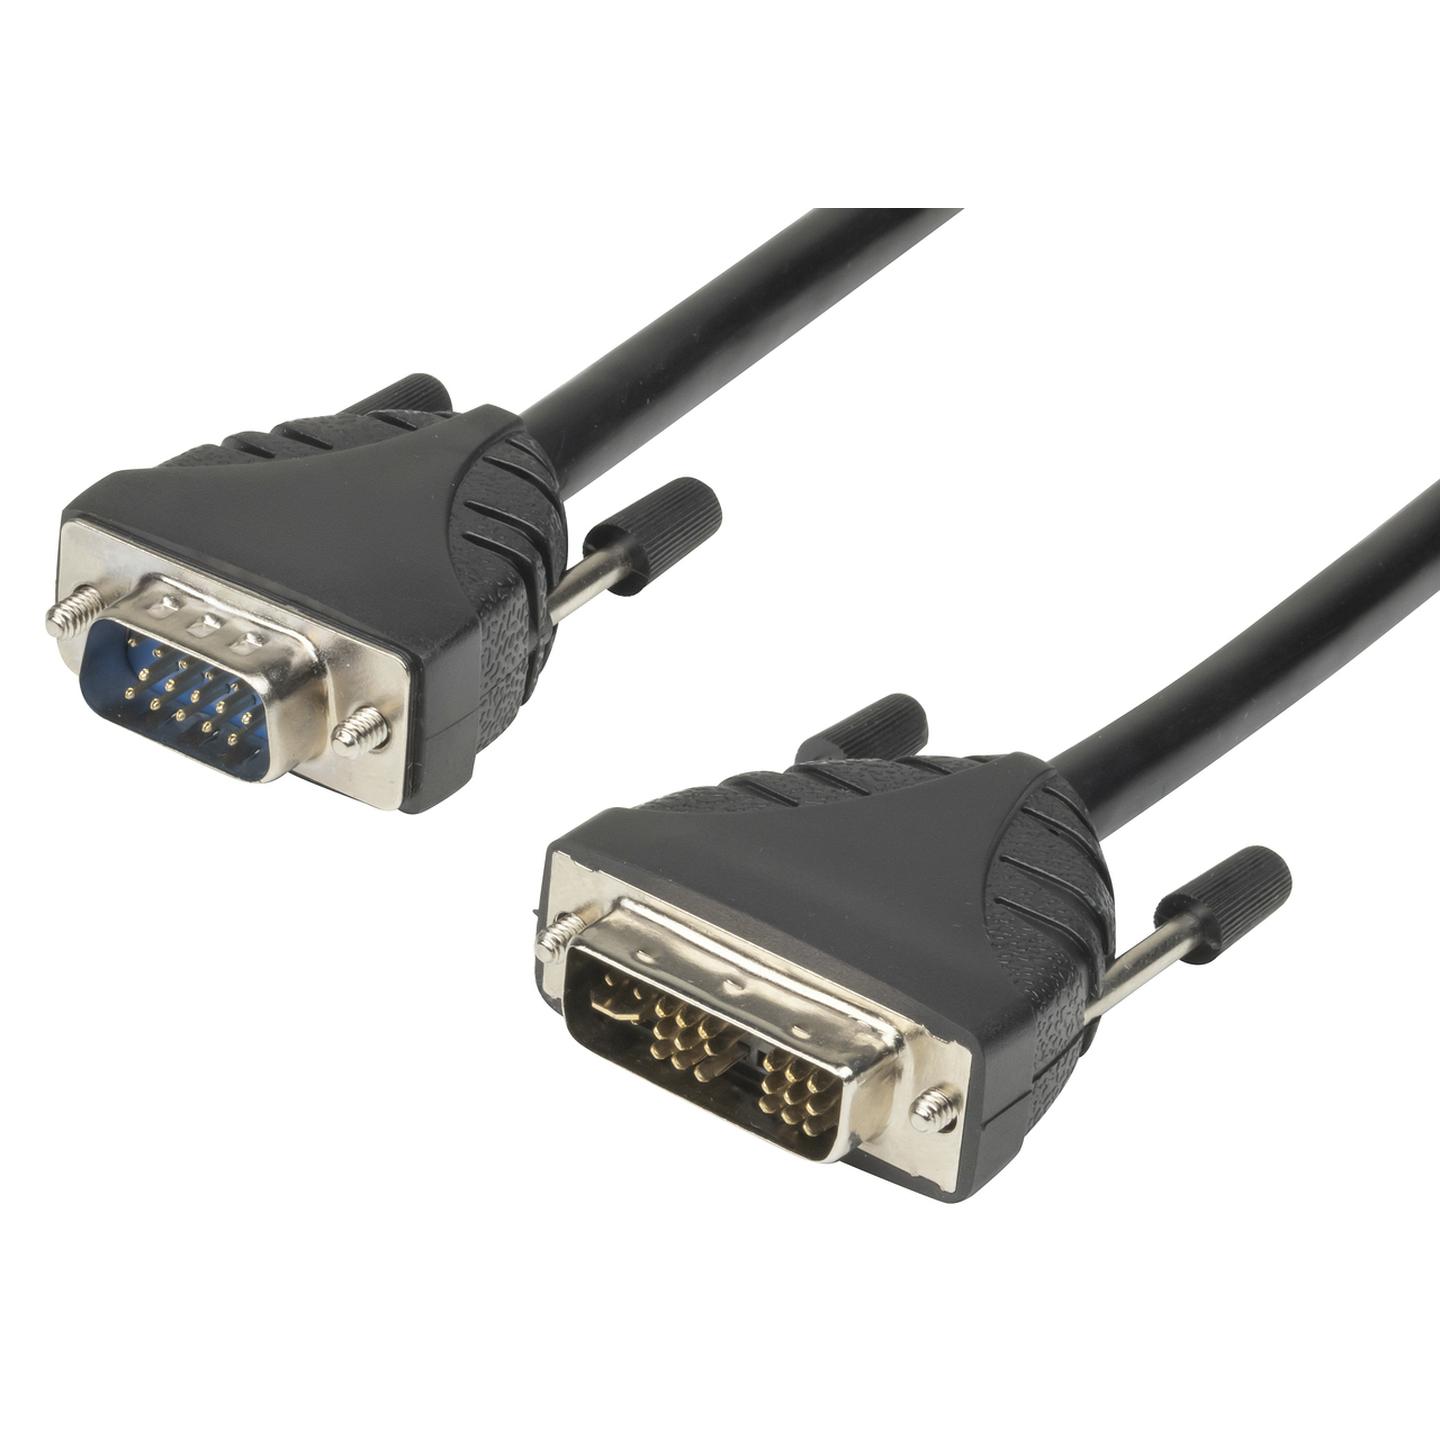 DVI-A to VGA Video Cable 2m